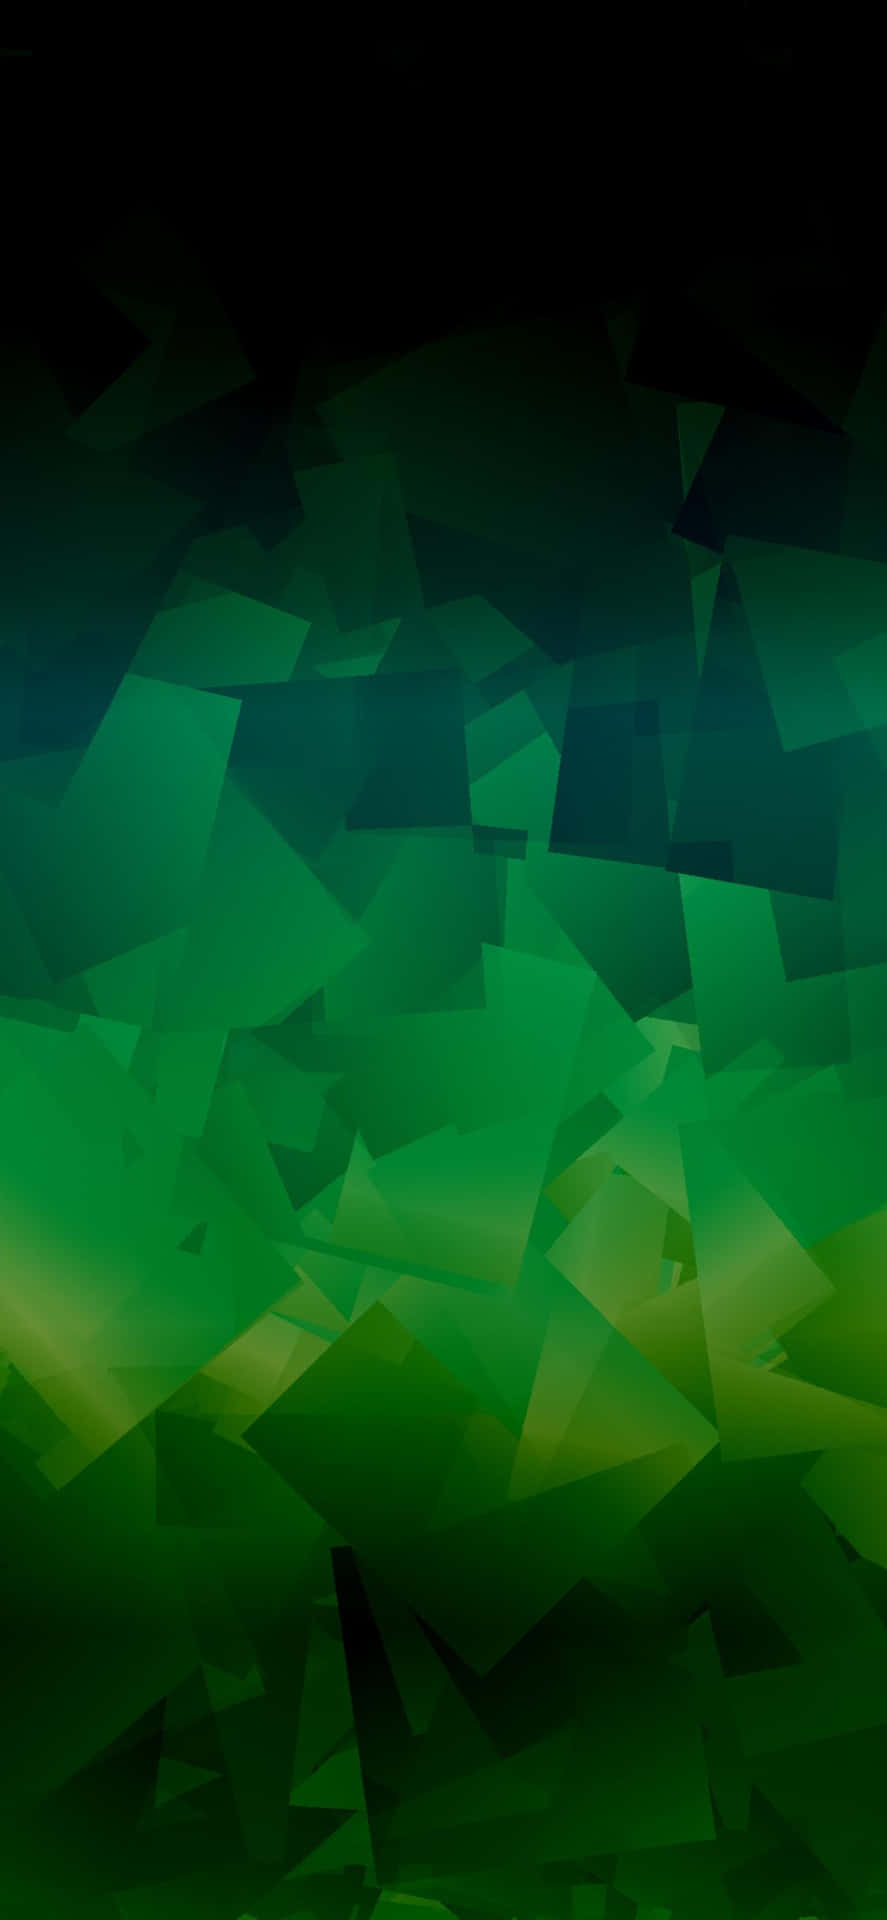 Look stylish and unique with this stunning Dark Green Iphone Wallpaper